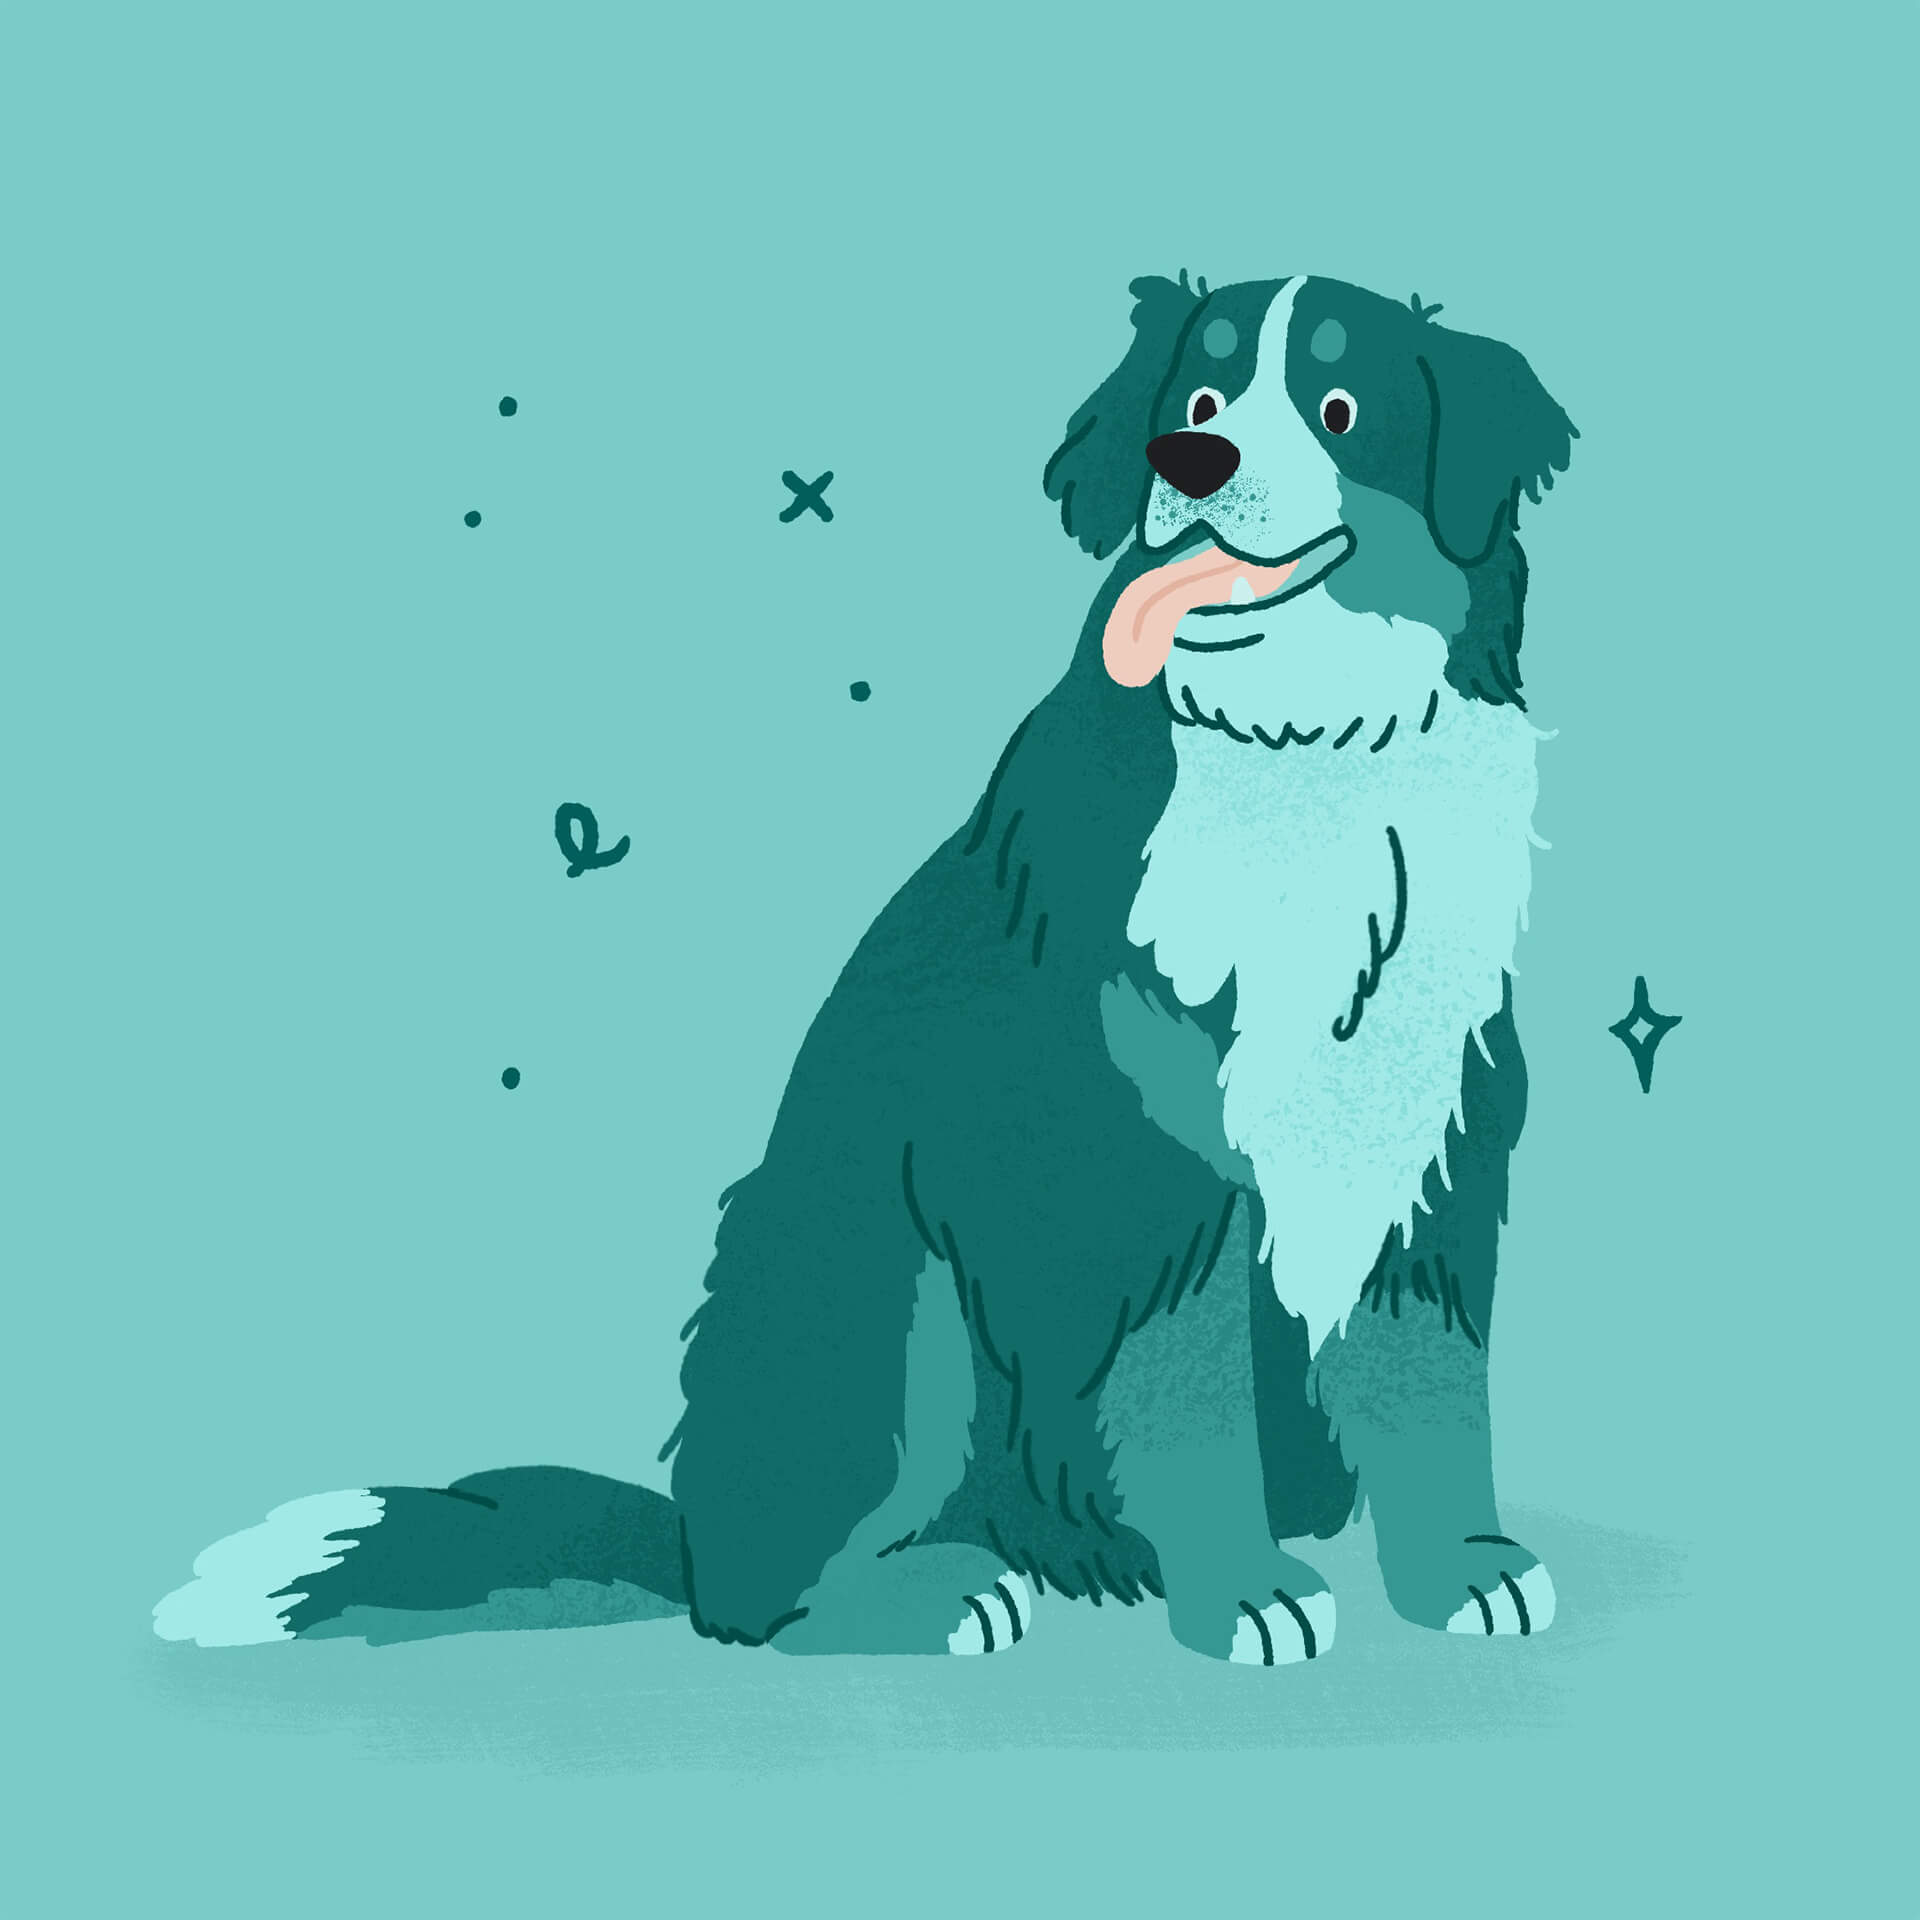 An illustration of a blue bernese mountain dog sitting and smiling with its tongue out